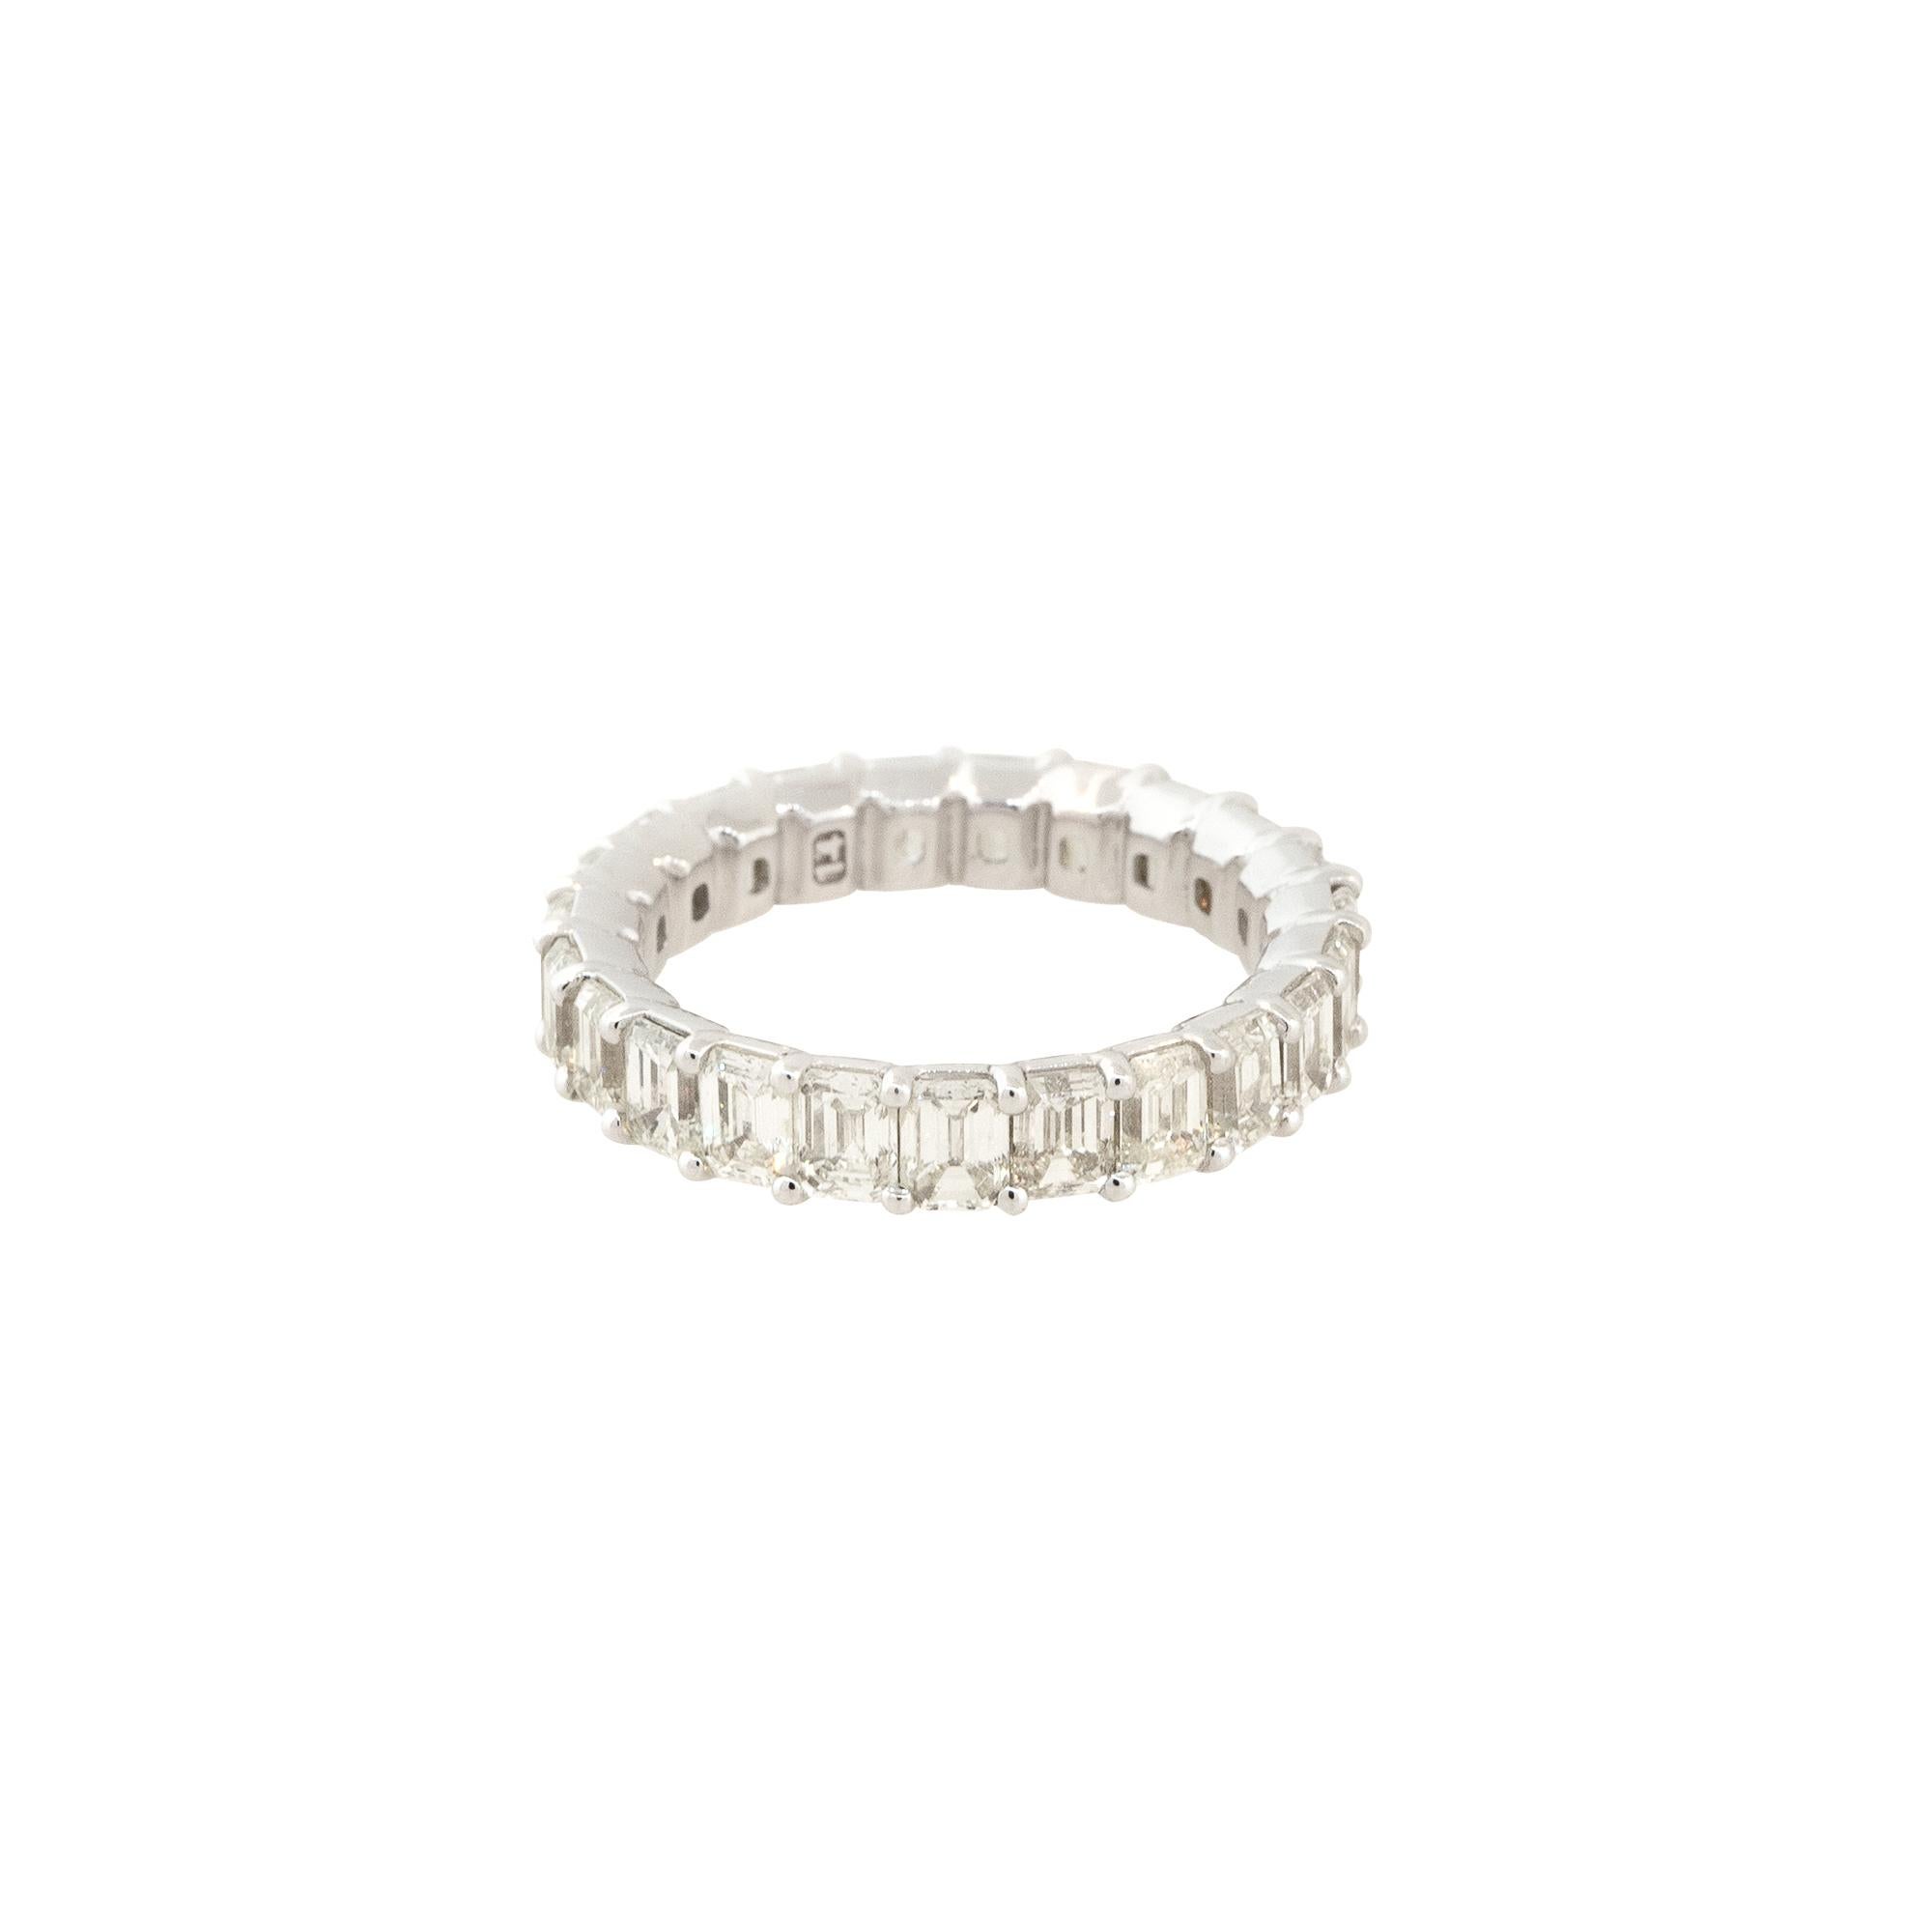 18k White Gold 4.85ctw Emerald Cut Diamond Eternity Band

Style: Women's Diamond Eternity Band
Material: 18k White Gold
Main Diamond Details: Approximately 4.85ctw of Emerald Cut Diamonds. Diamonds are prong set and there are 23 Diamonds in total.